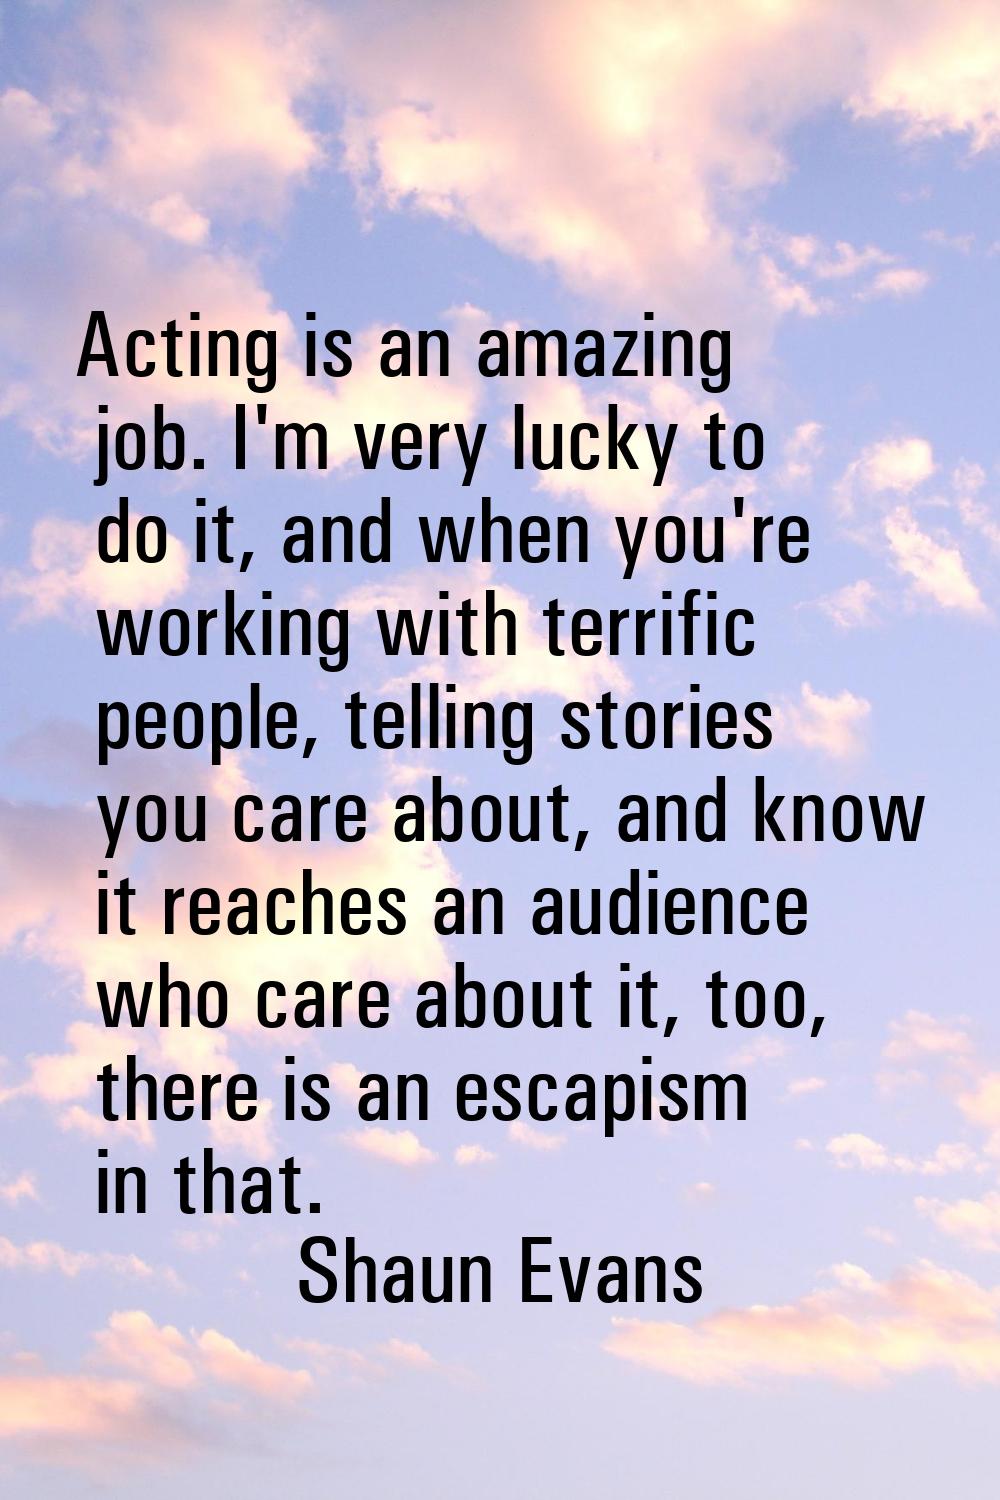 Acting is an amazing job. I'm very lucky to do it, and when you're working with terrific people, te